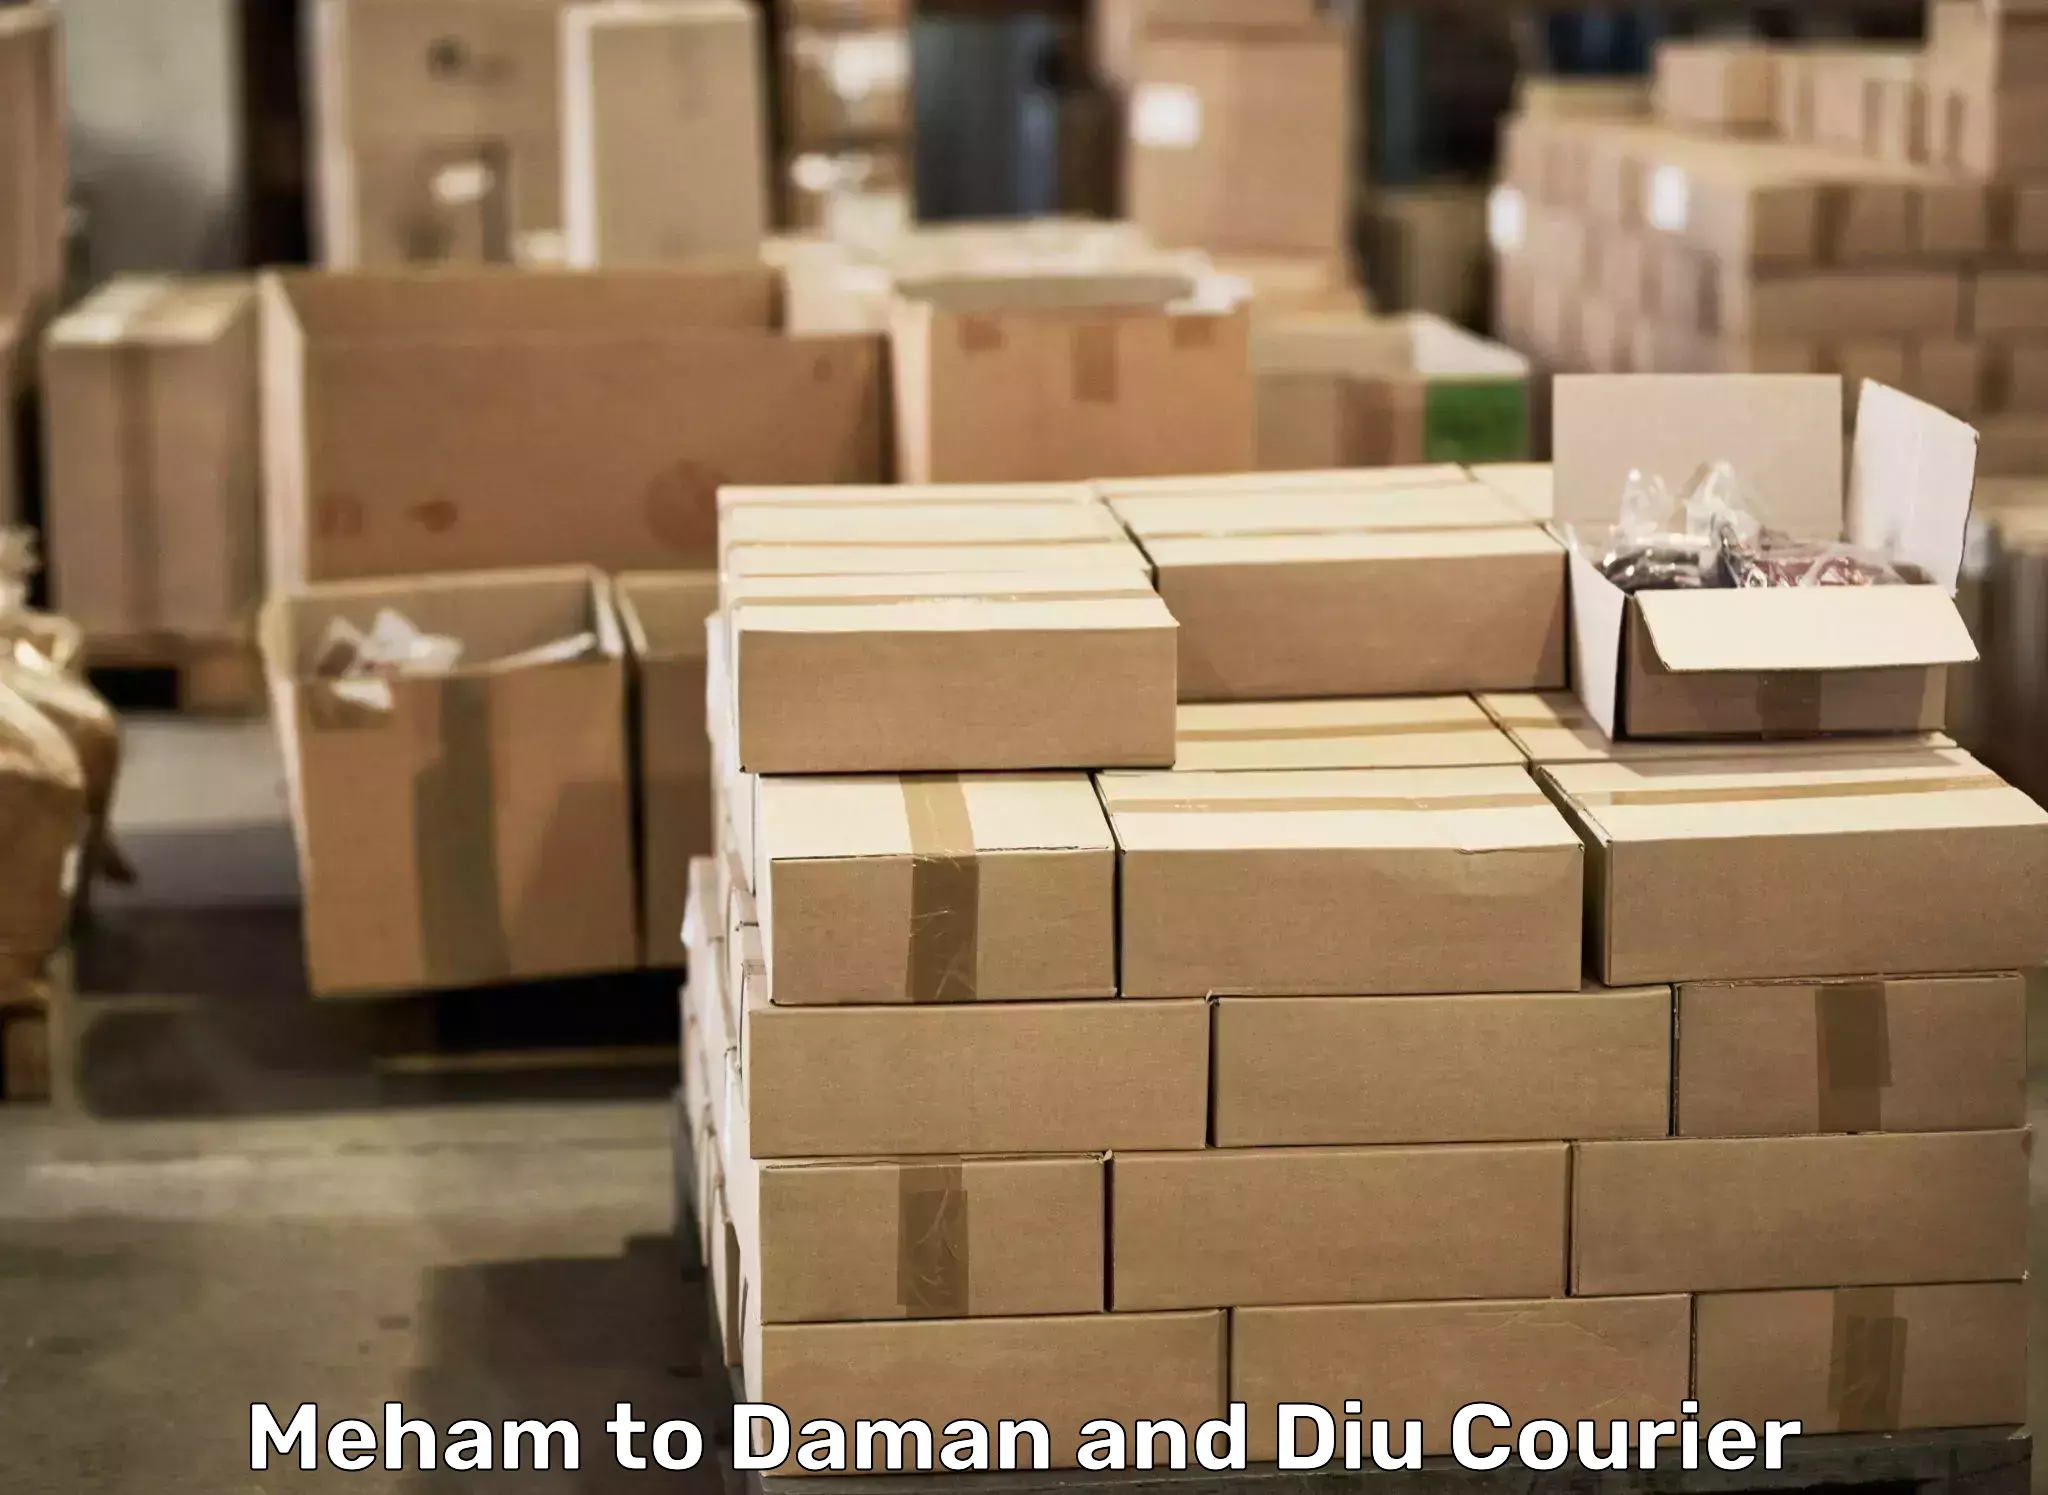 Affordable household movers Meham to Diu